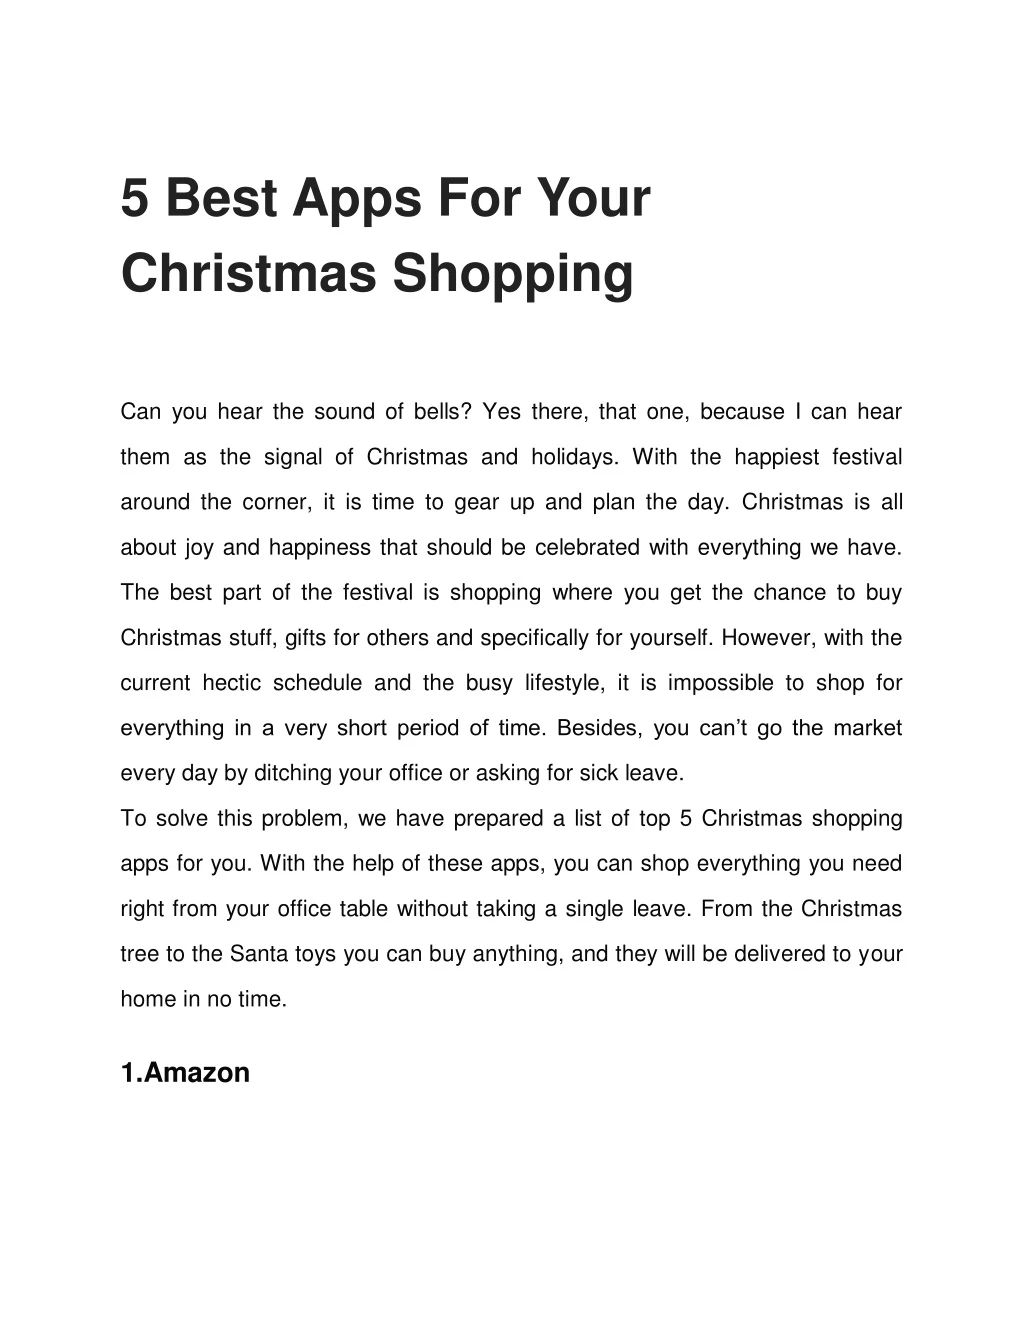 5 best apps for your christmas shopping